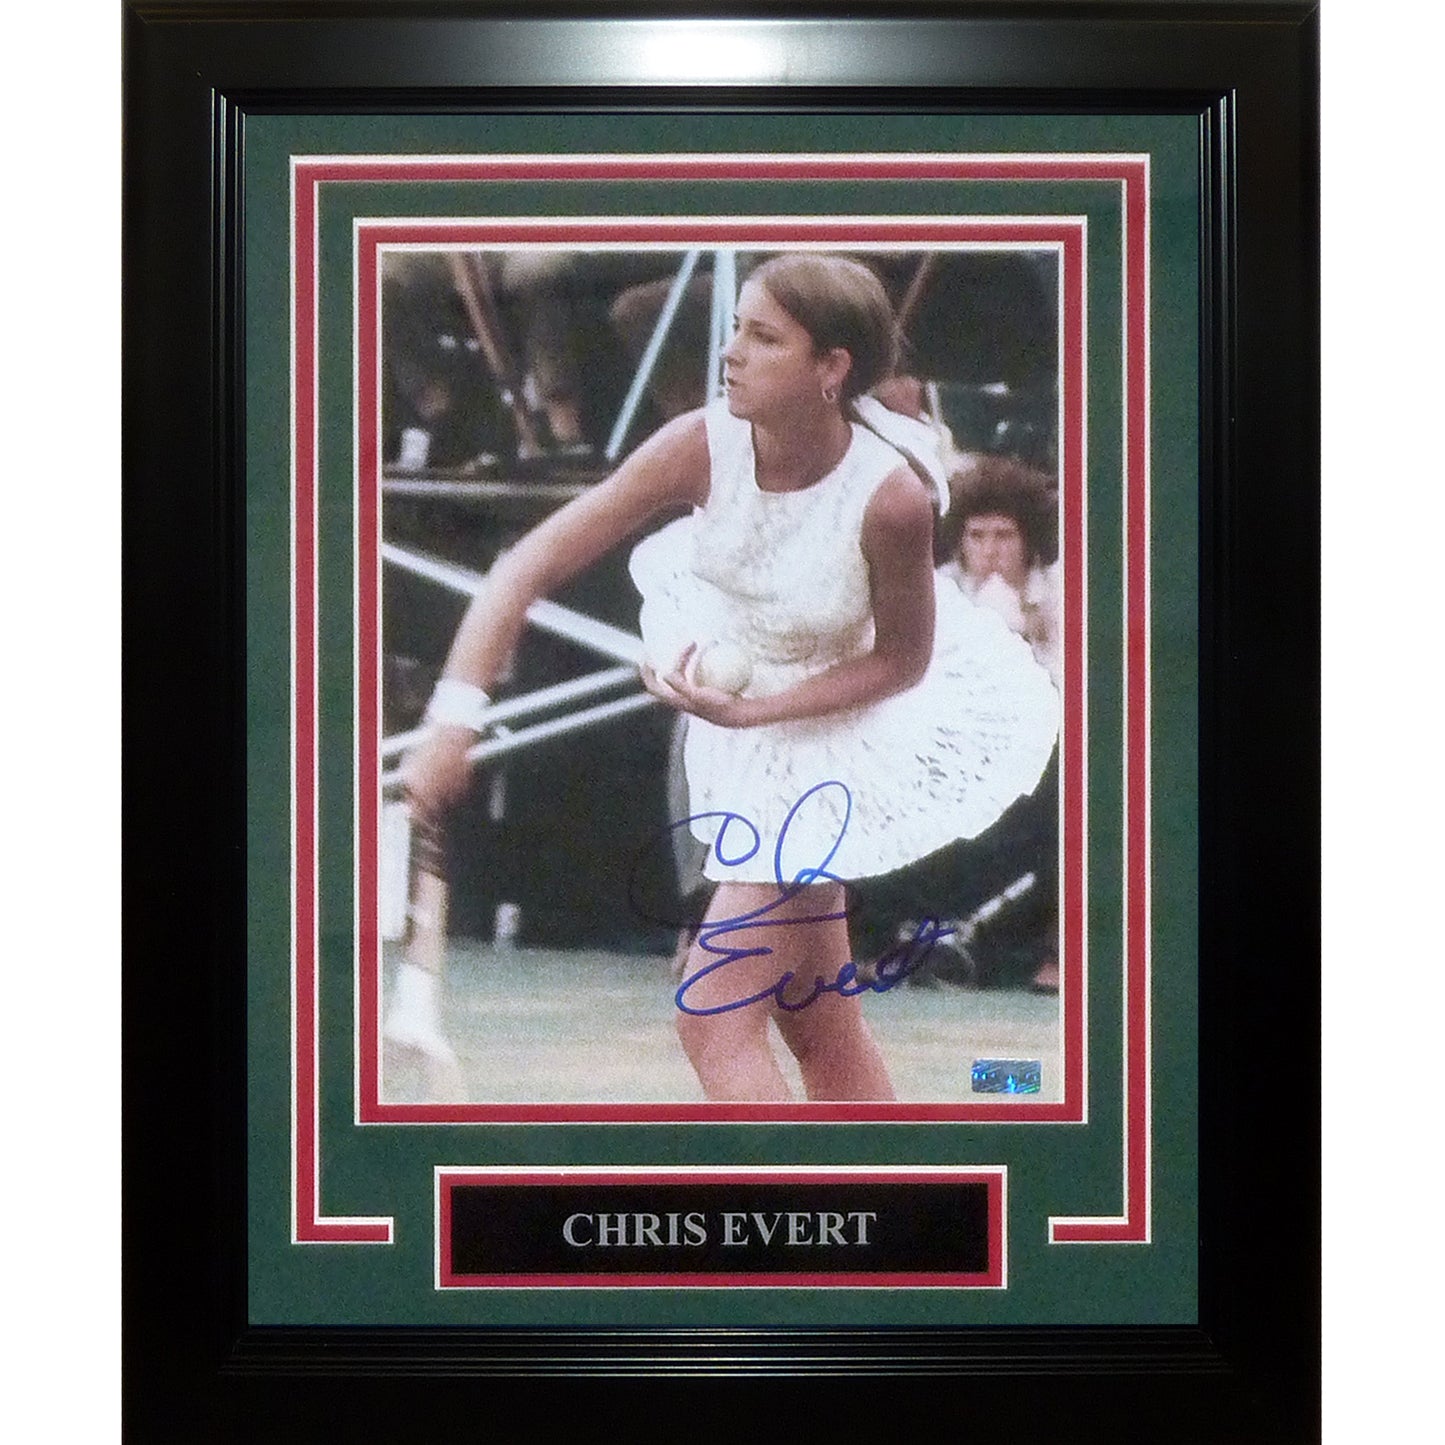 Chris Evert Autographed Tennis (Action) Deluxe Framed 8x10 Photo